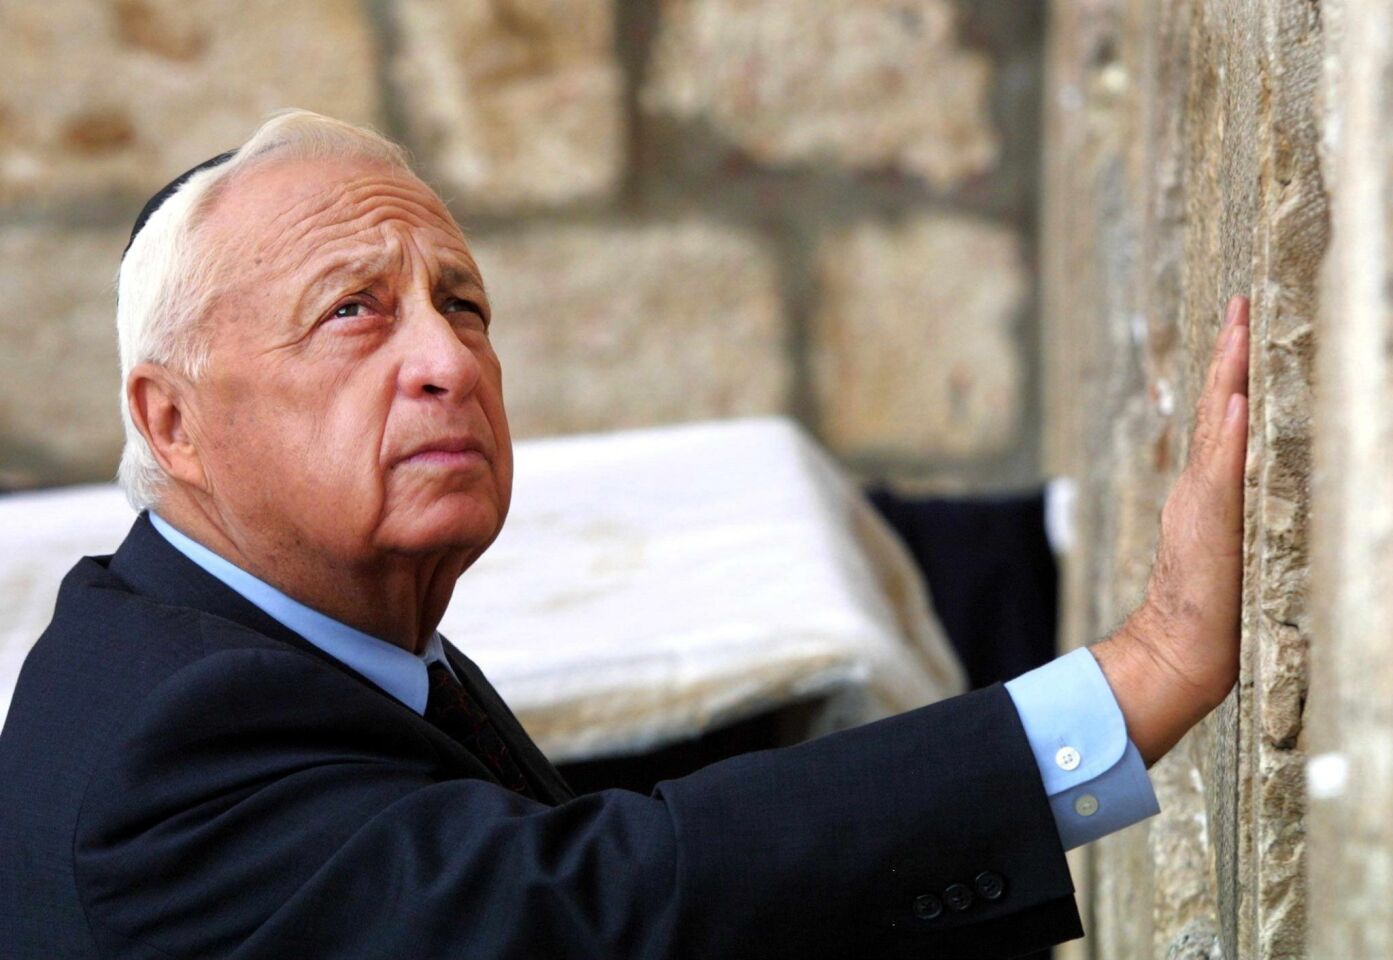 Israel's former prime minister was an iron-willed army general. He spearheaded Jewish settlement of Palestinian territories, then years later presided over Israel's withdrawal from the Gaza Strip. He was 85.